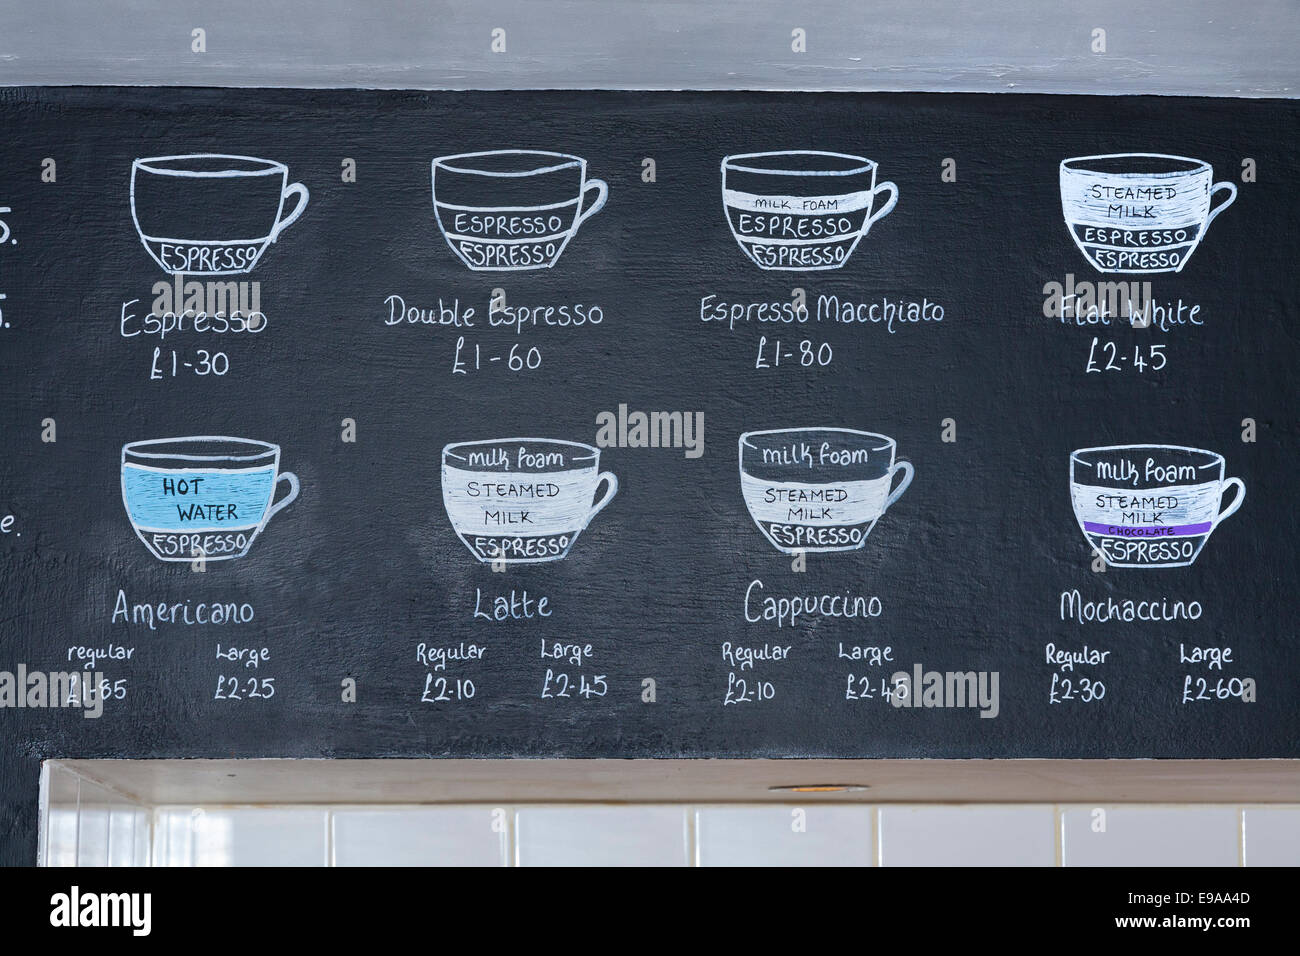 menu and price list for coffee drinks on a blackboard in a cafe in E9AA4D